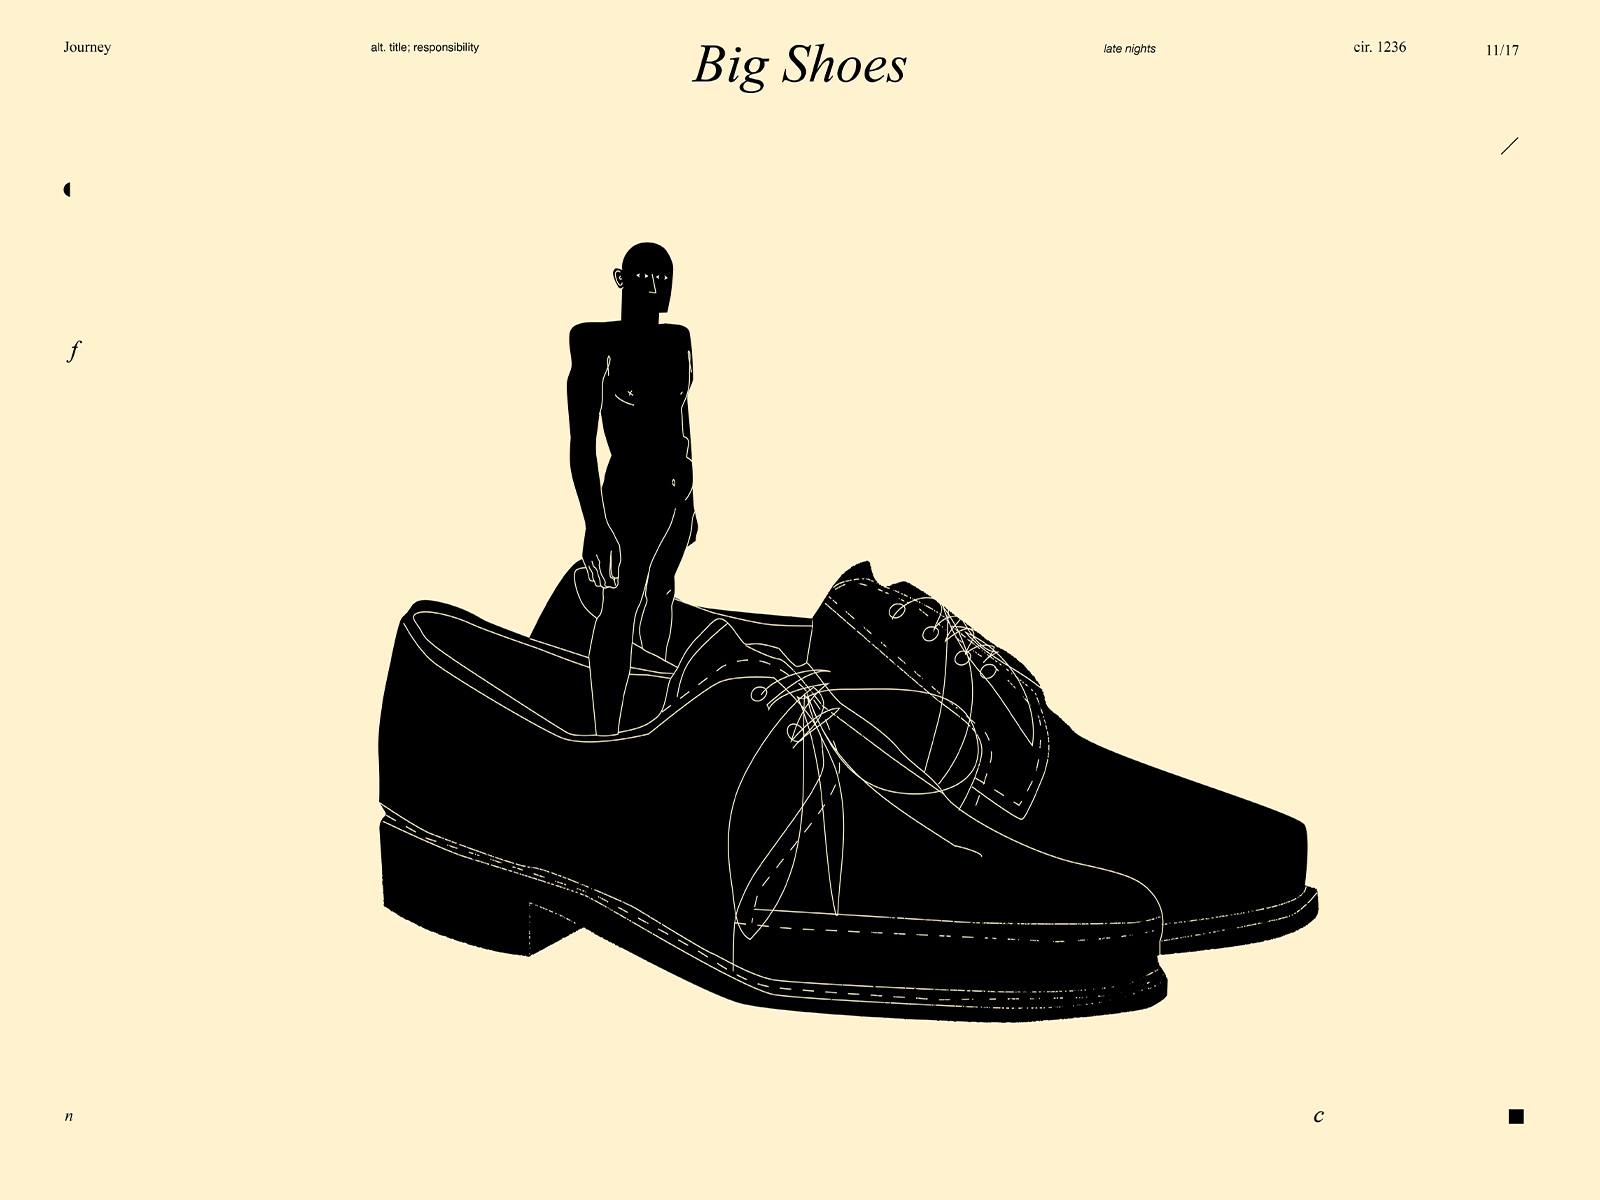 Responsibilities abstract composition design dual meaning figure figure illustration illustration laconic lines minimal poster responsibilities shoes shoes illustration